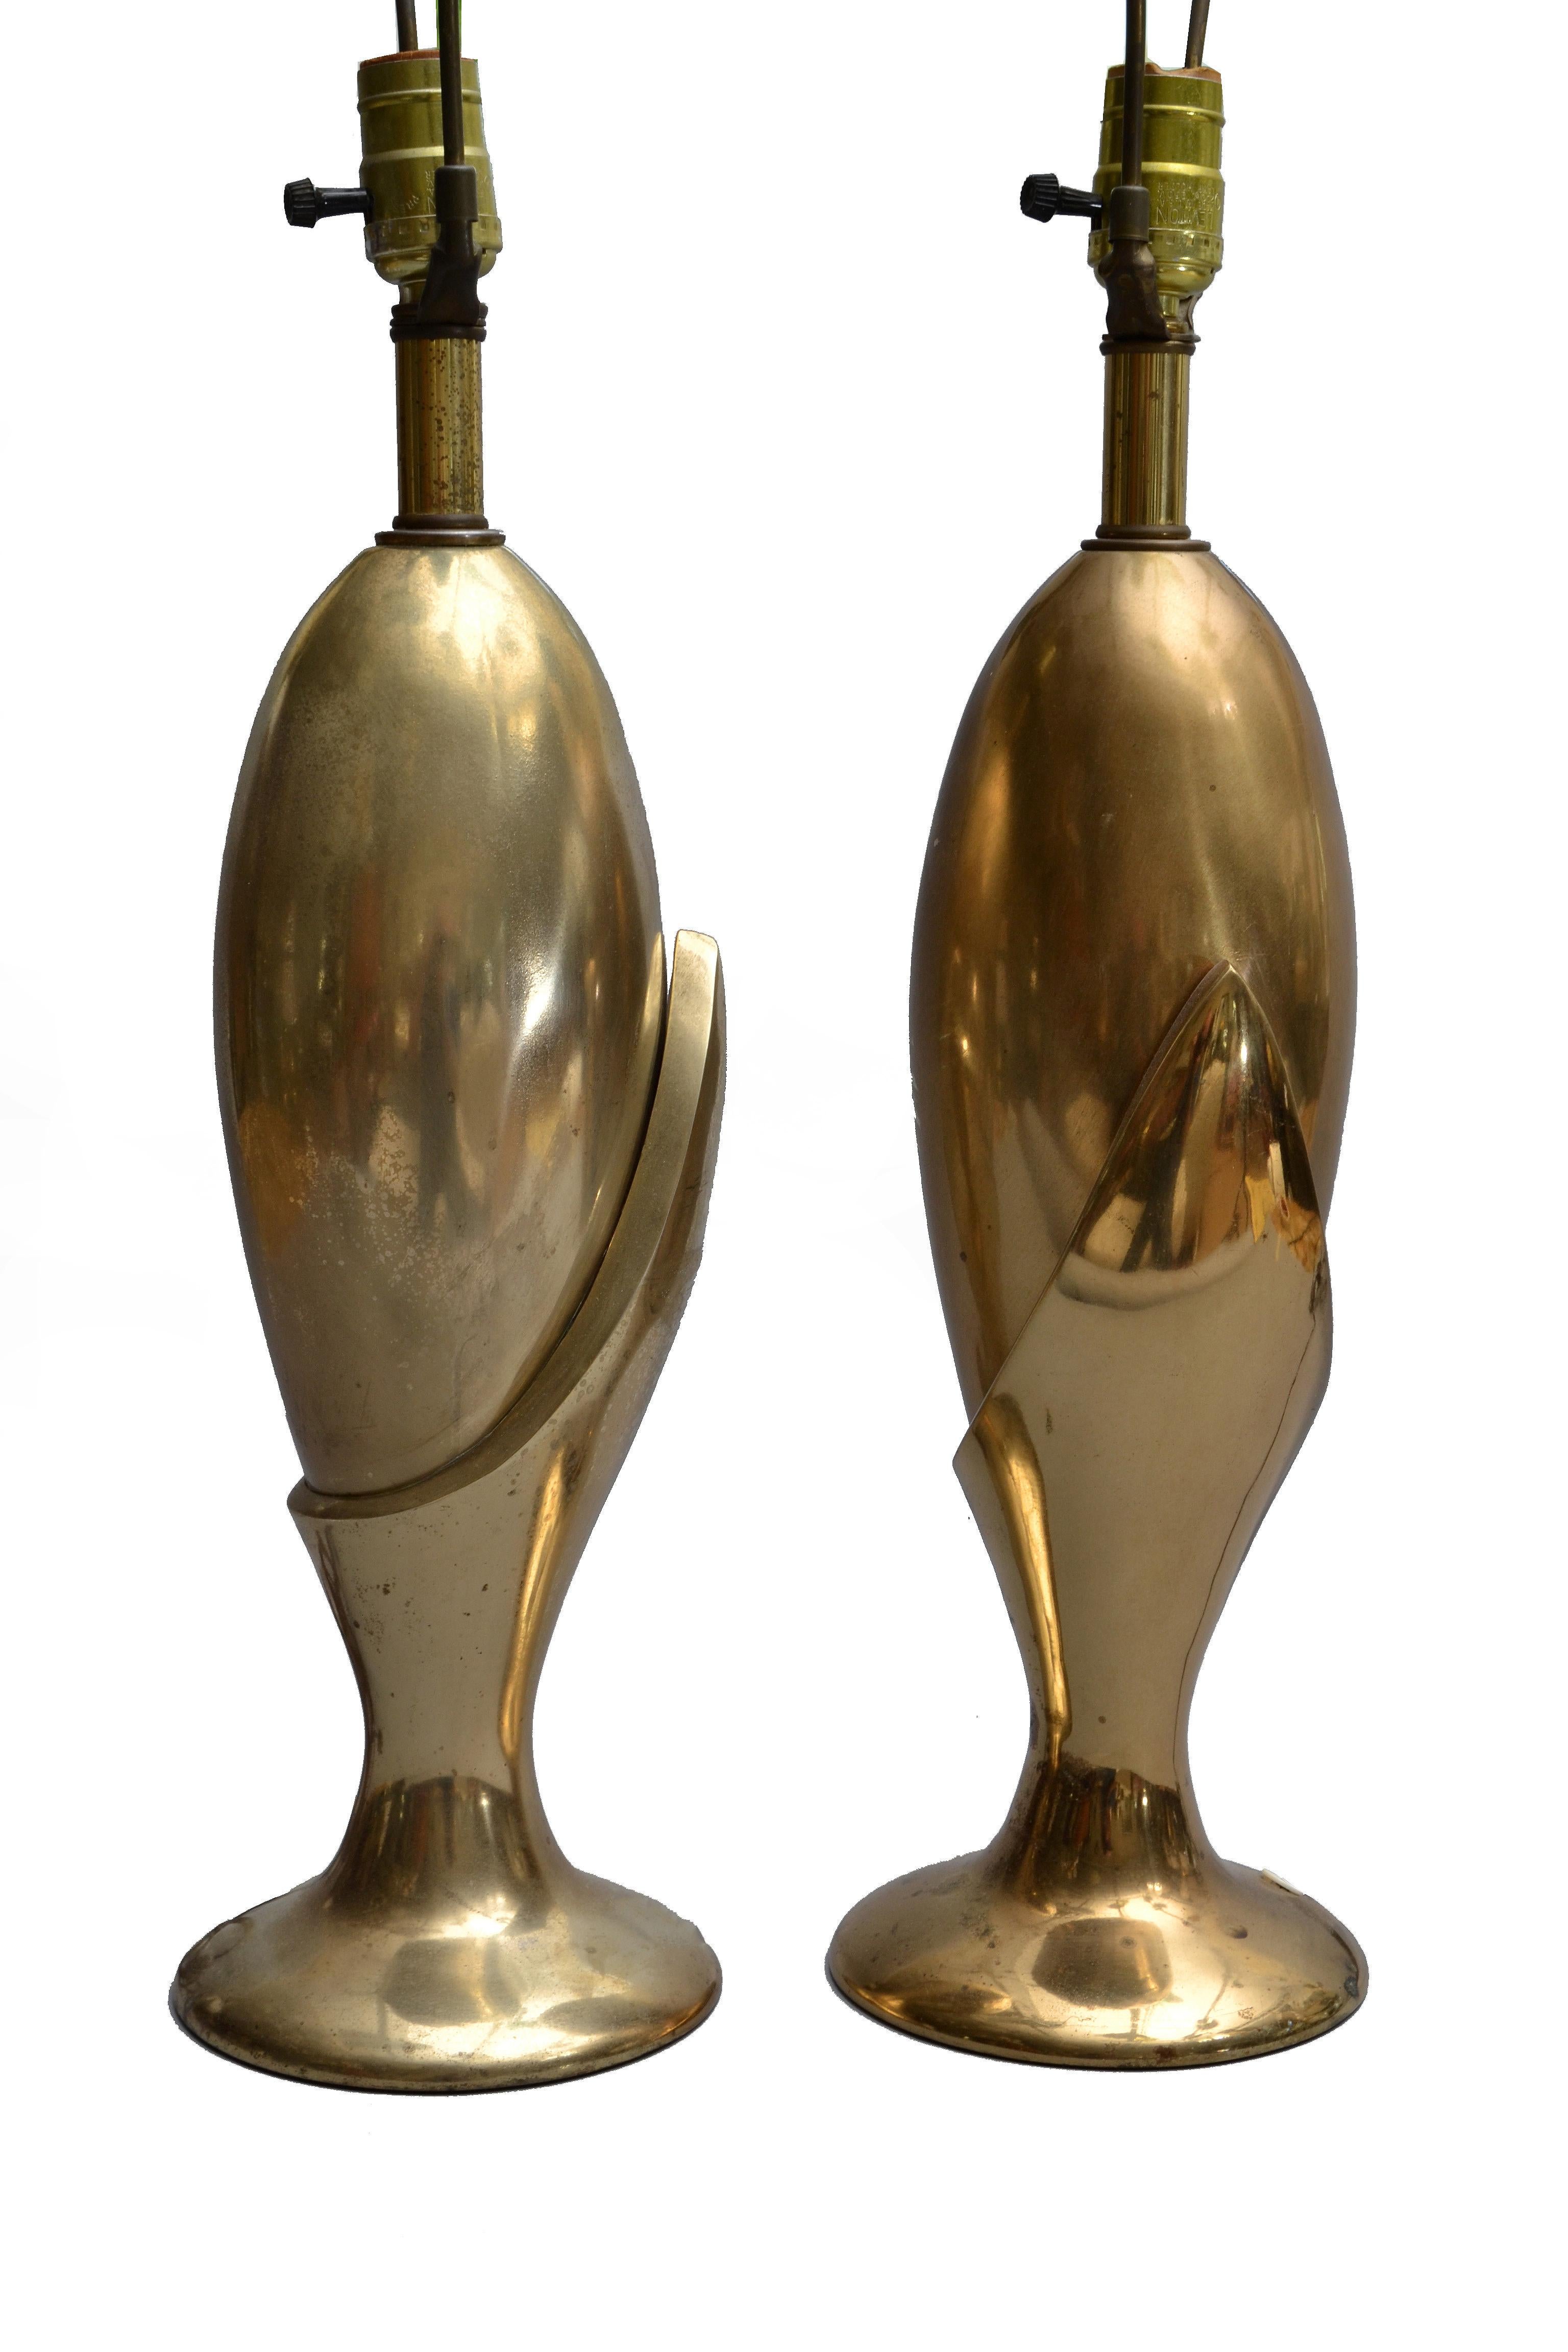 20th Century Pair of Art Deco Brass Table Lamps by Heyco